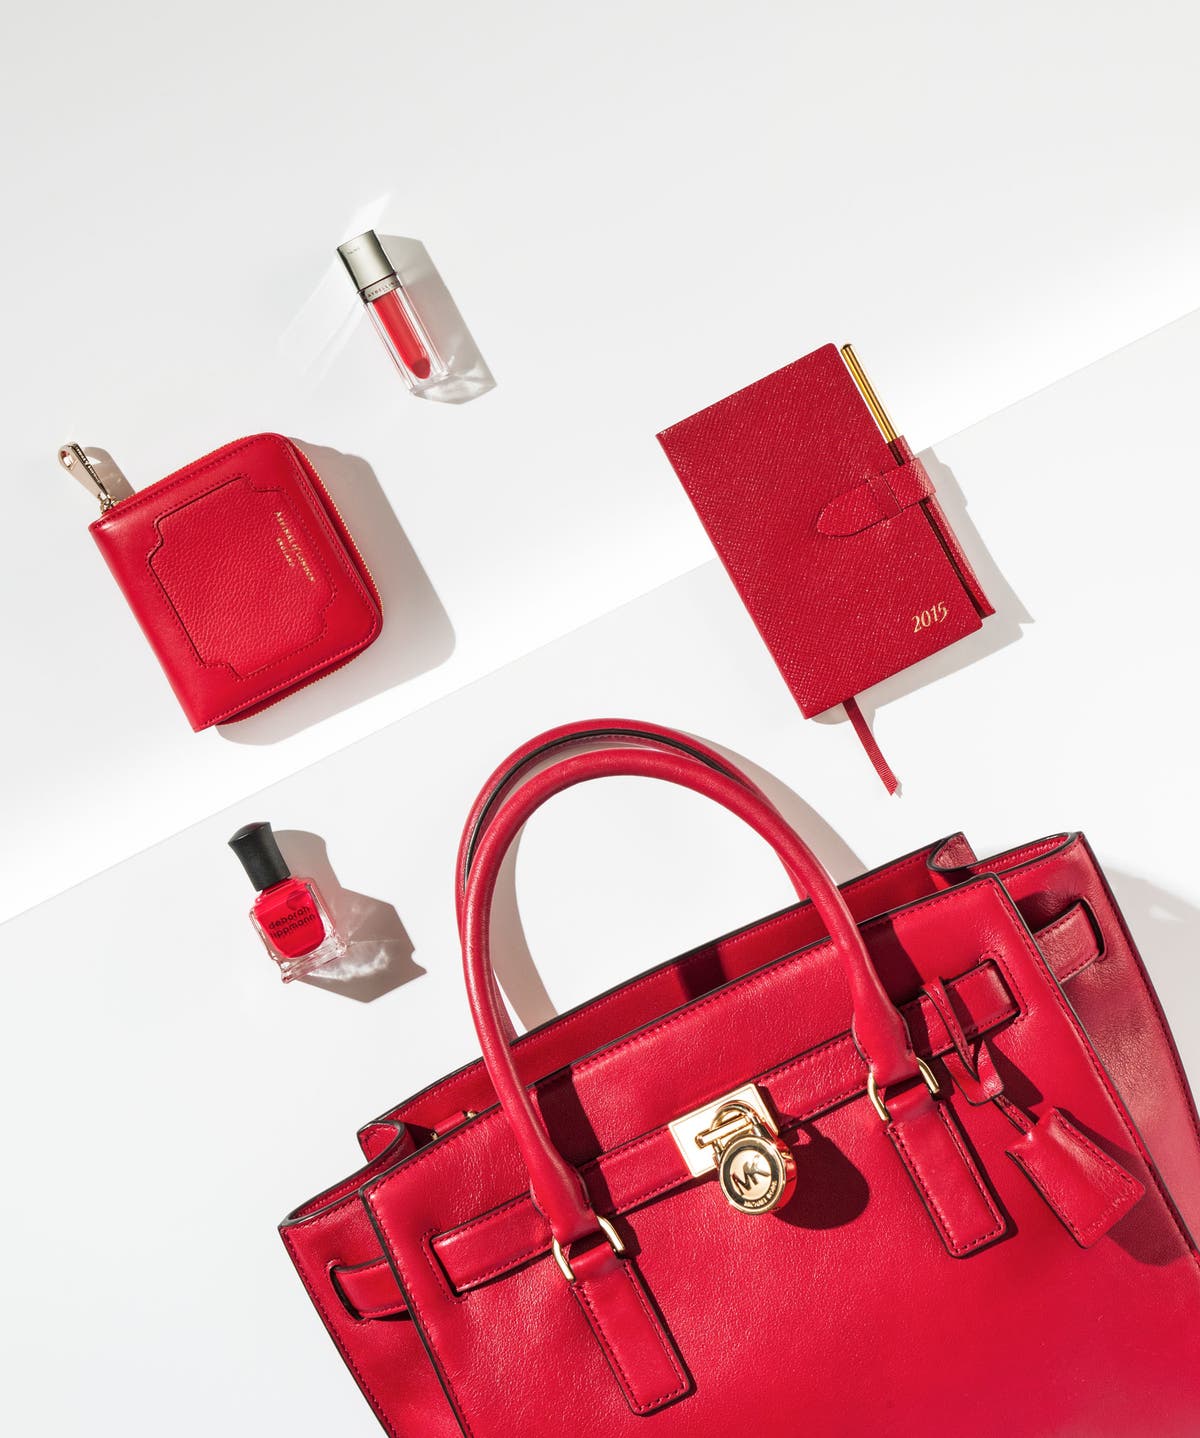 The shade of autumn/winter 14 puts scarlet temptation in our path with ...